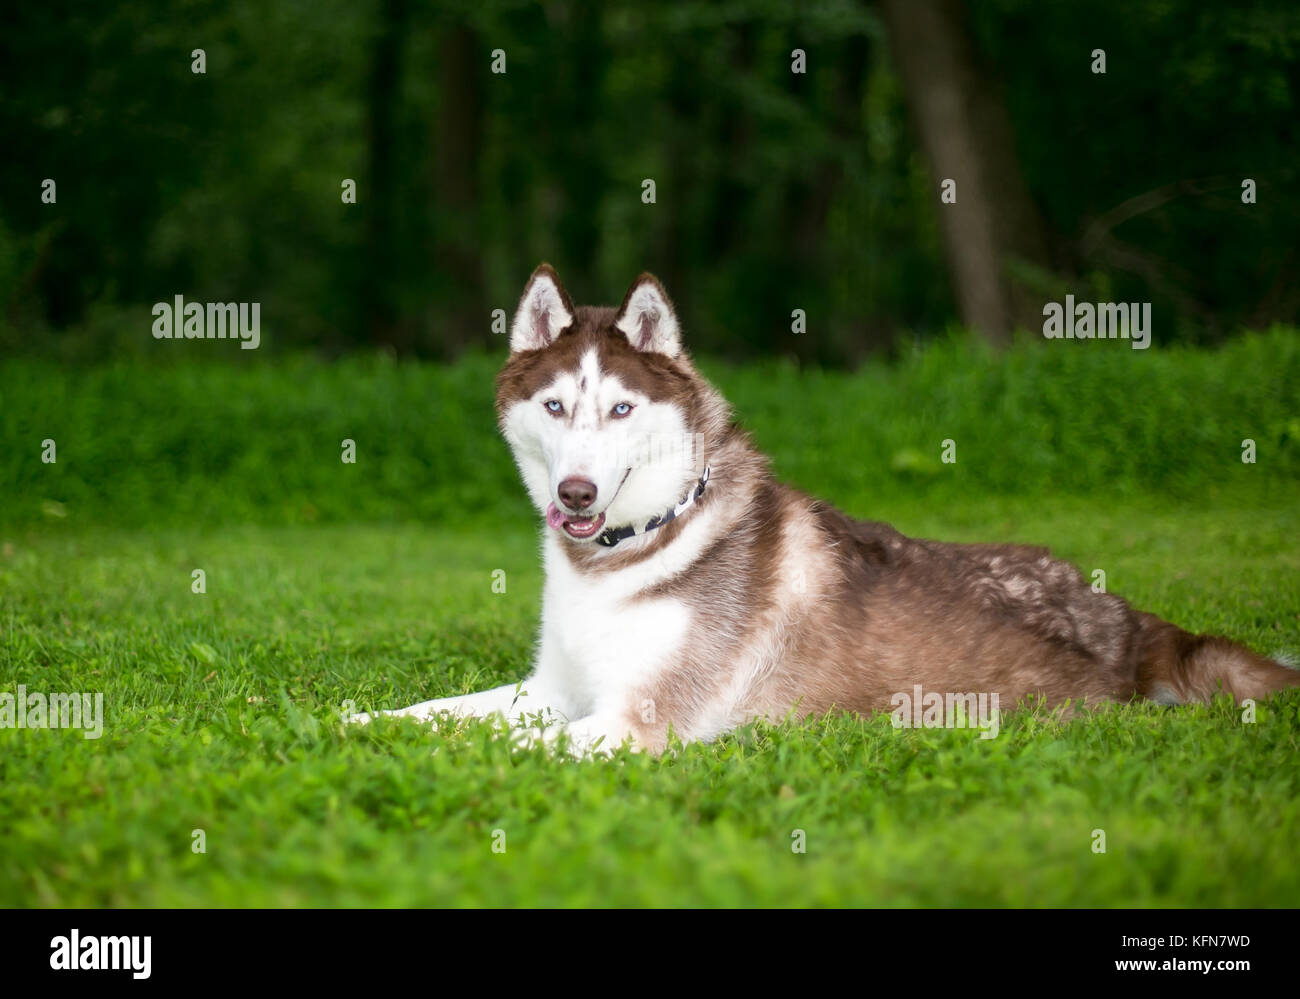 A Red Siberian Husky dog relaxing in the grass Stock Photo